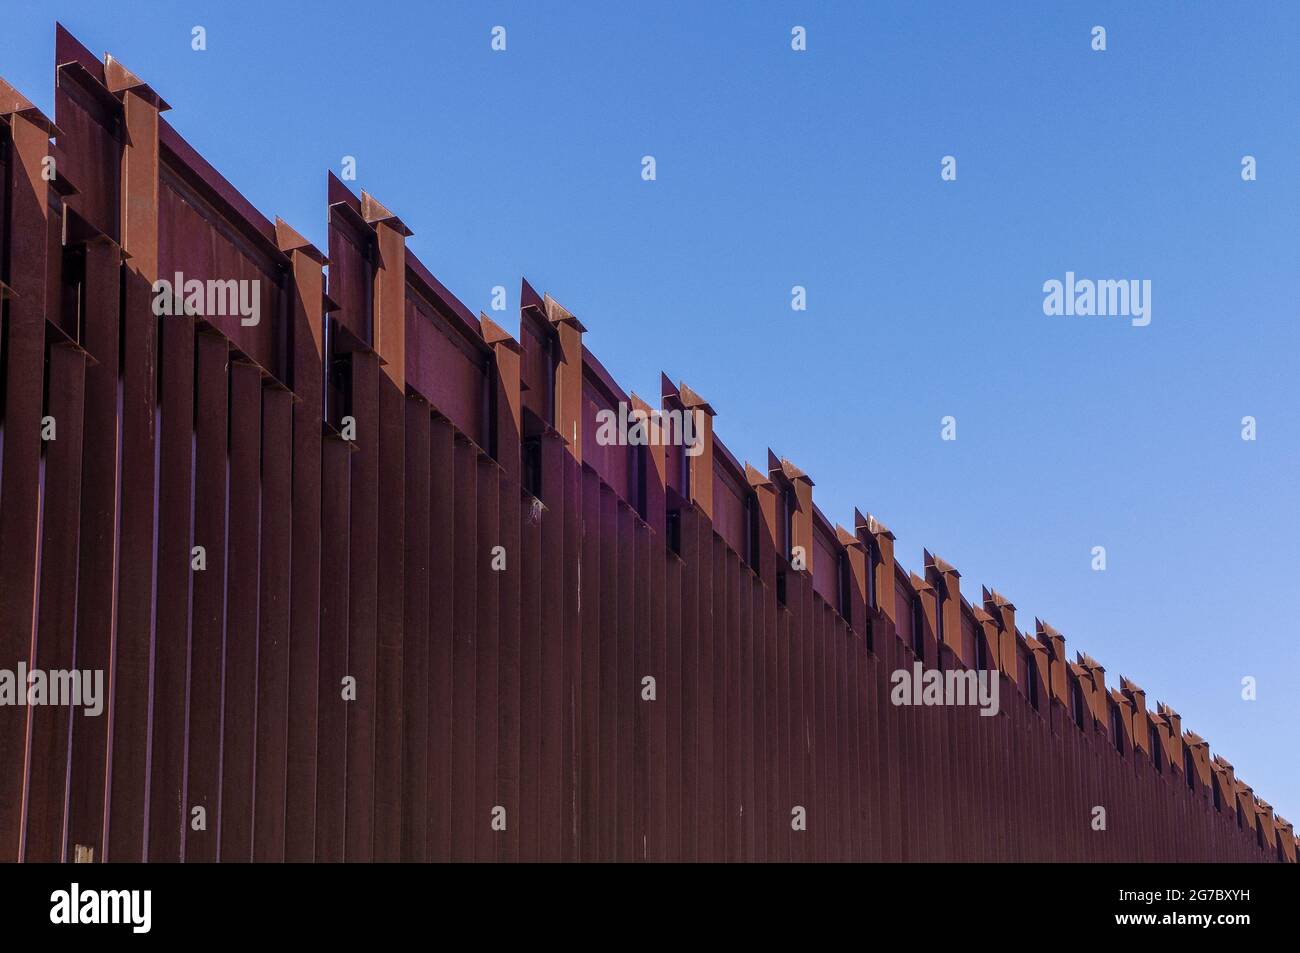 Image shows US border fence on the Mexico border, east of Nogales Arizona and Nogales Sonora Mexico, viewed from US side.This type of barrier is “boll Stock Photo